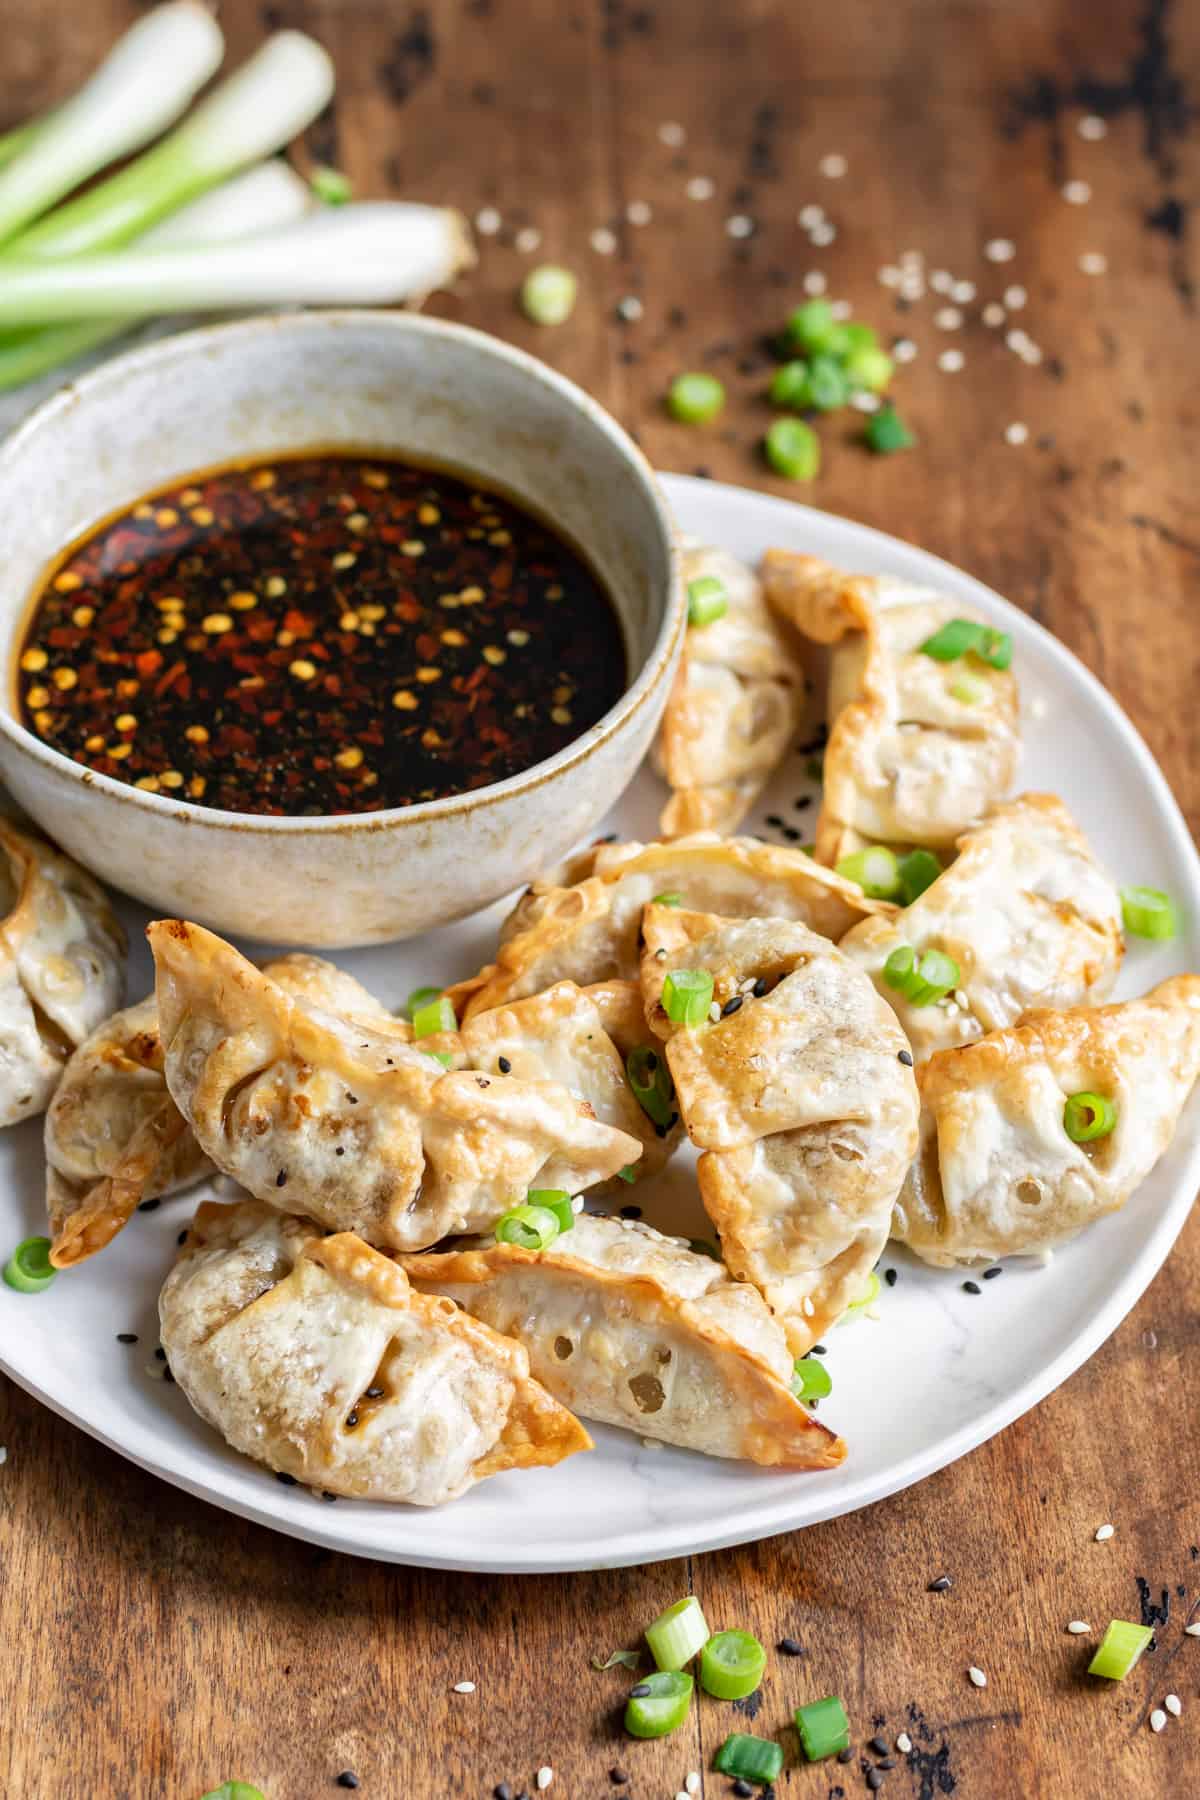 Plate of air fried potstickers and dipping sauce.